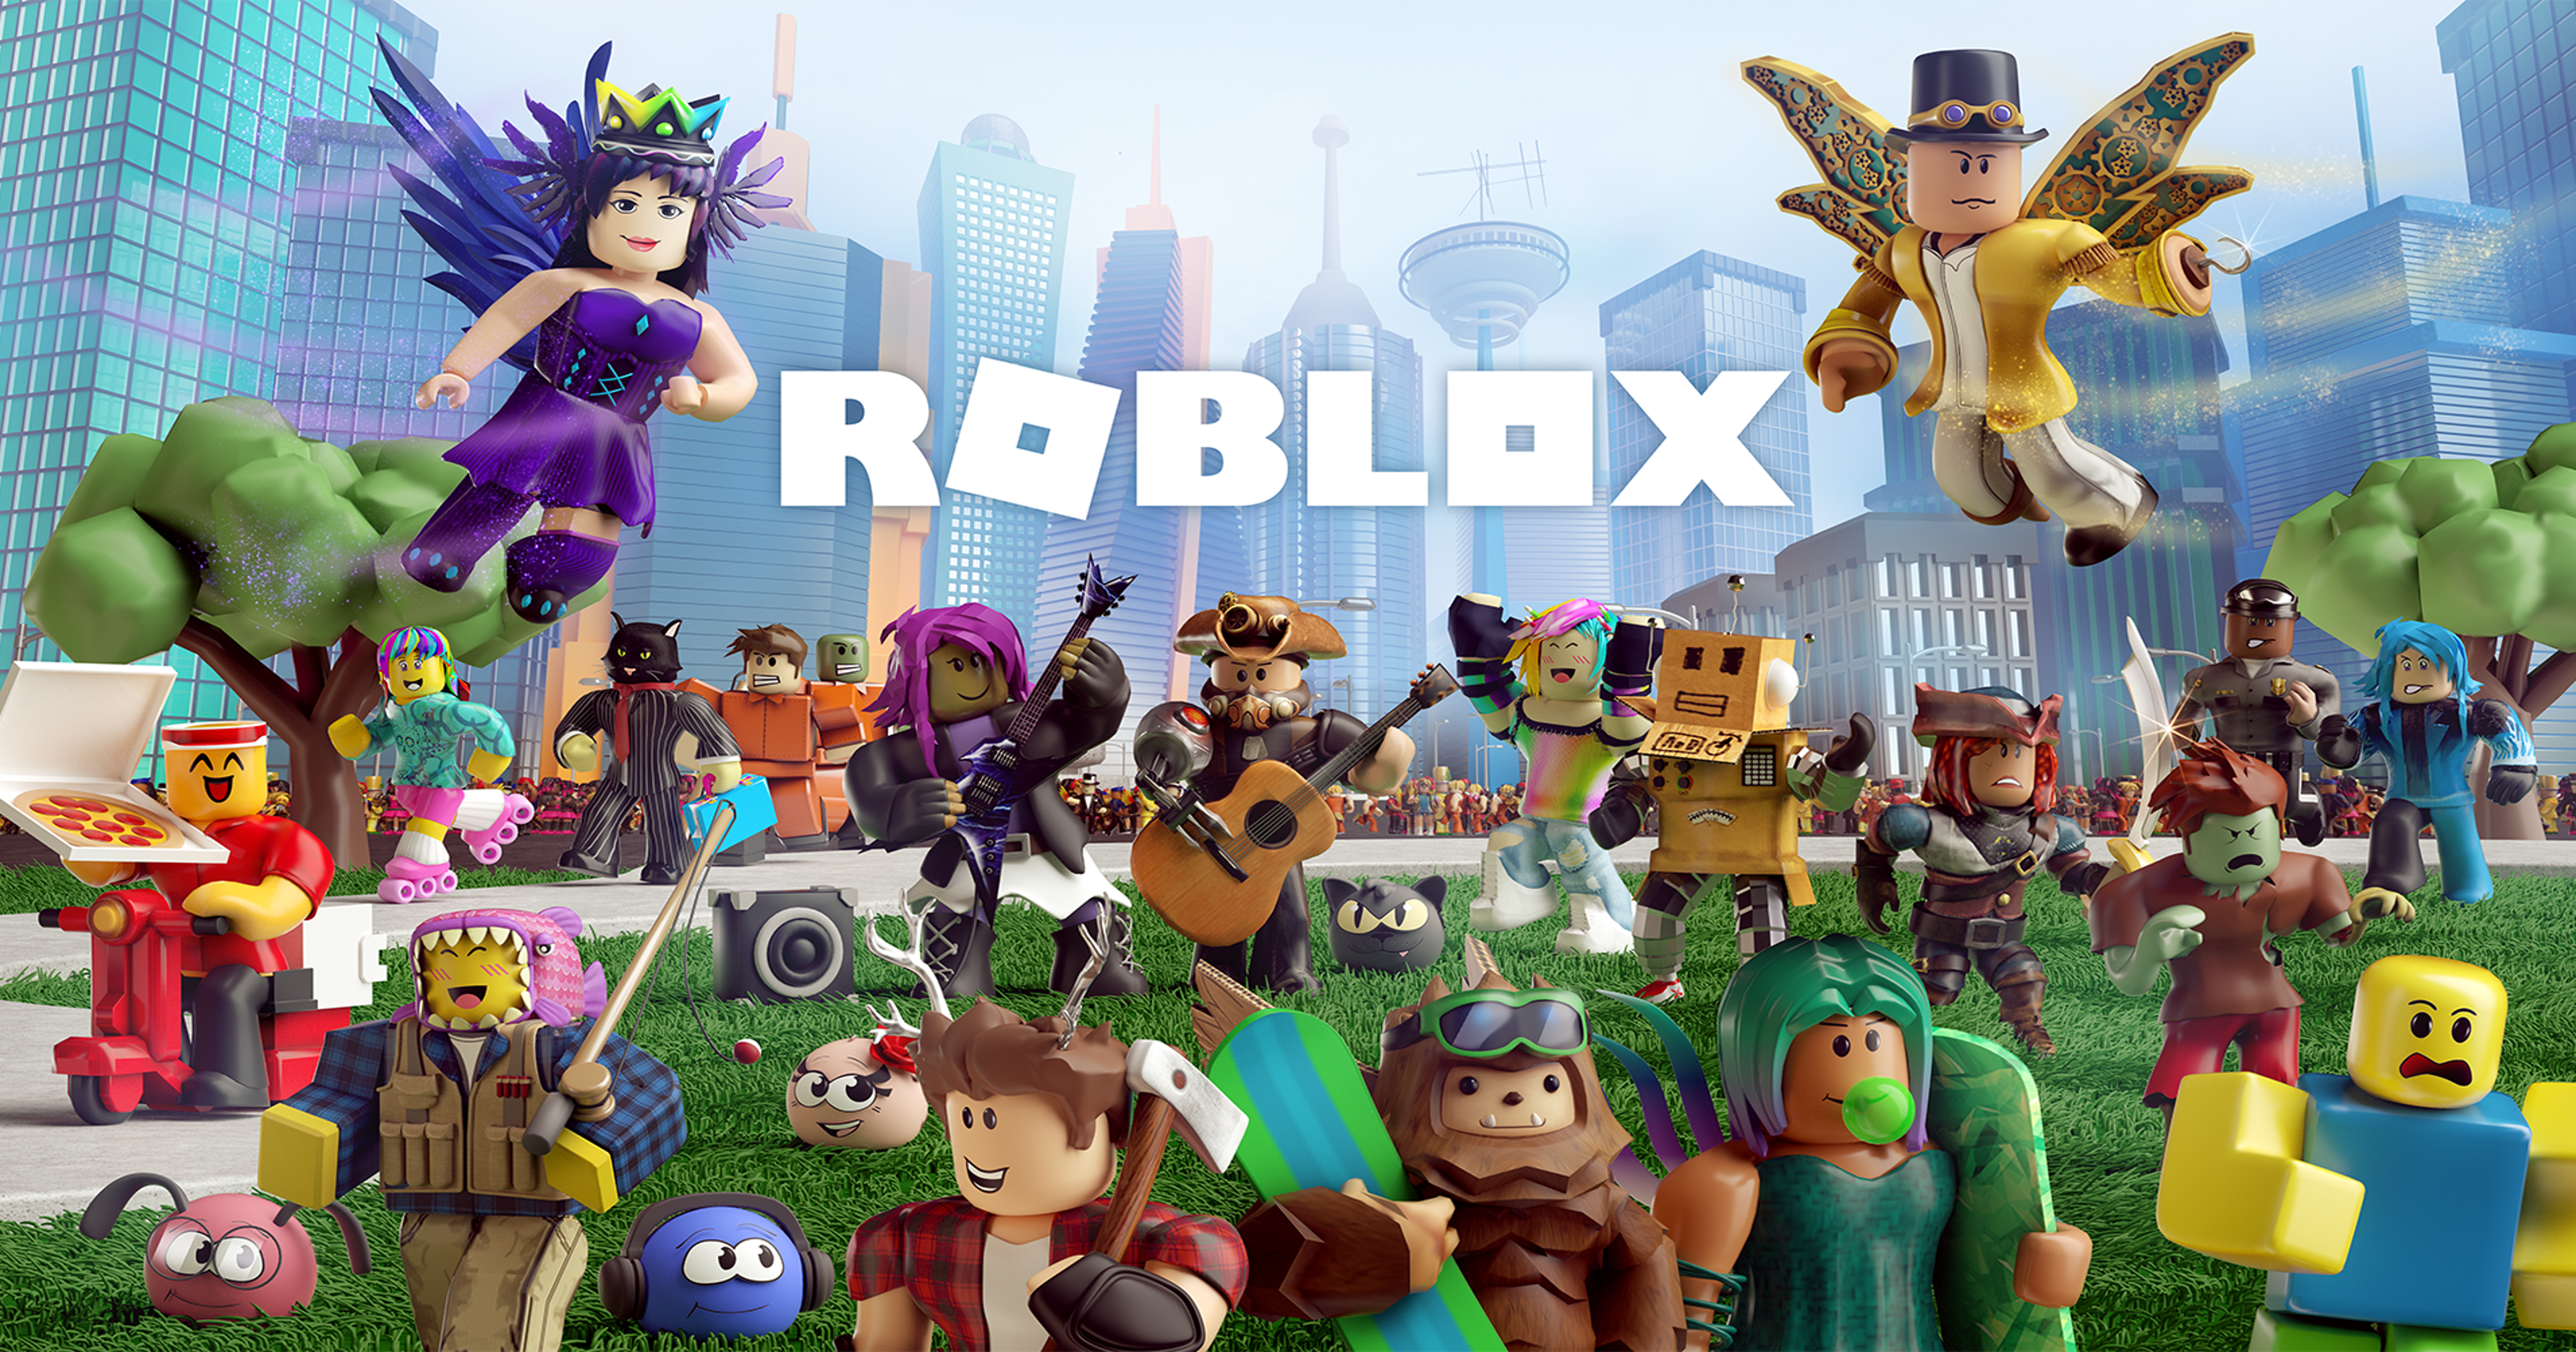 Roblox Kids Game Shows Character Being Sexually Violated Mom Warns - 